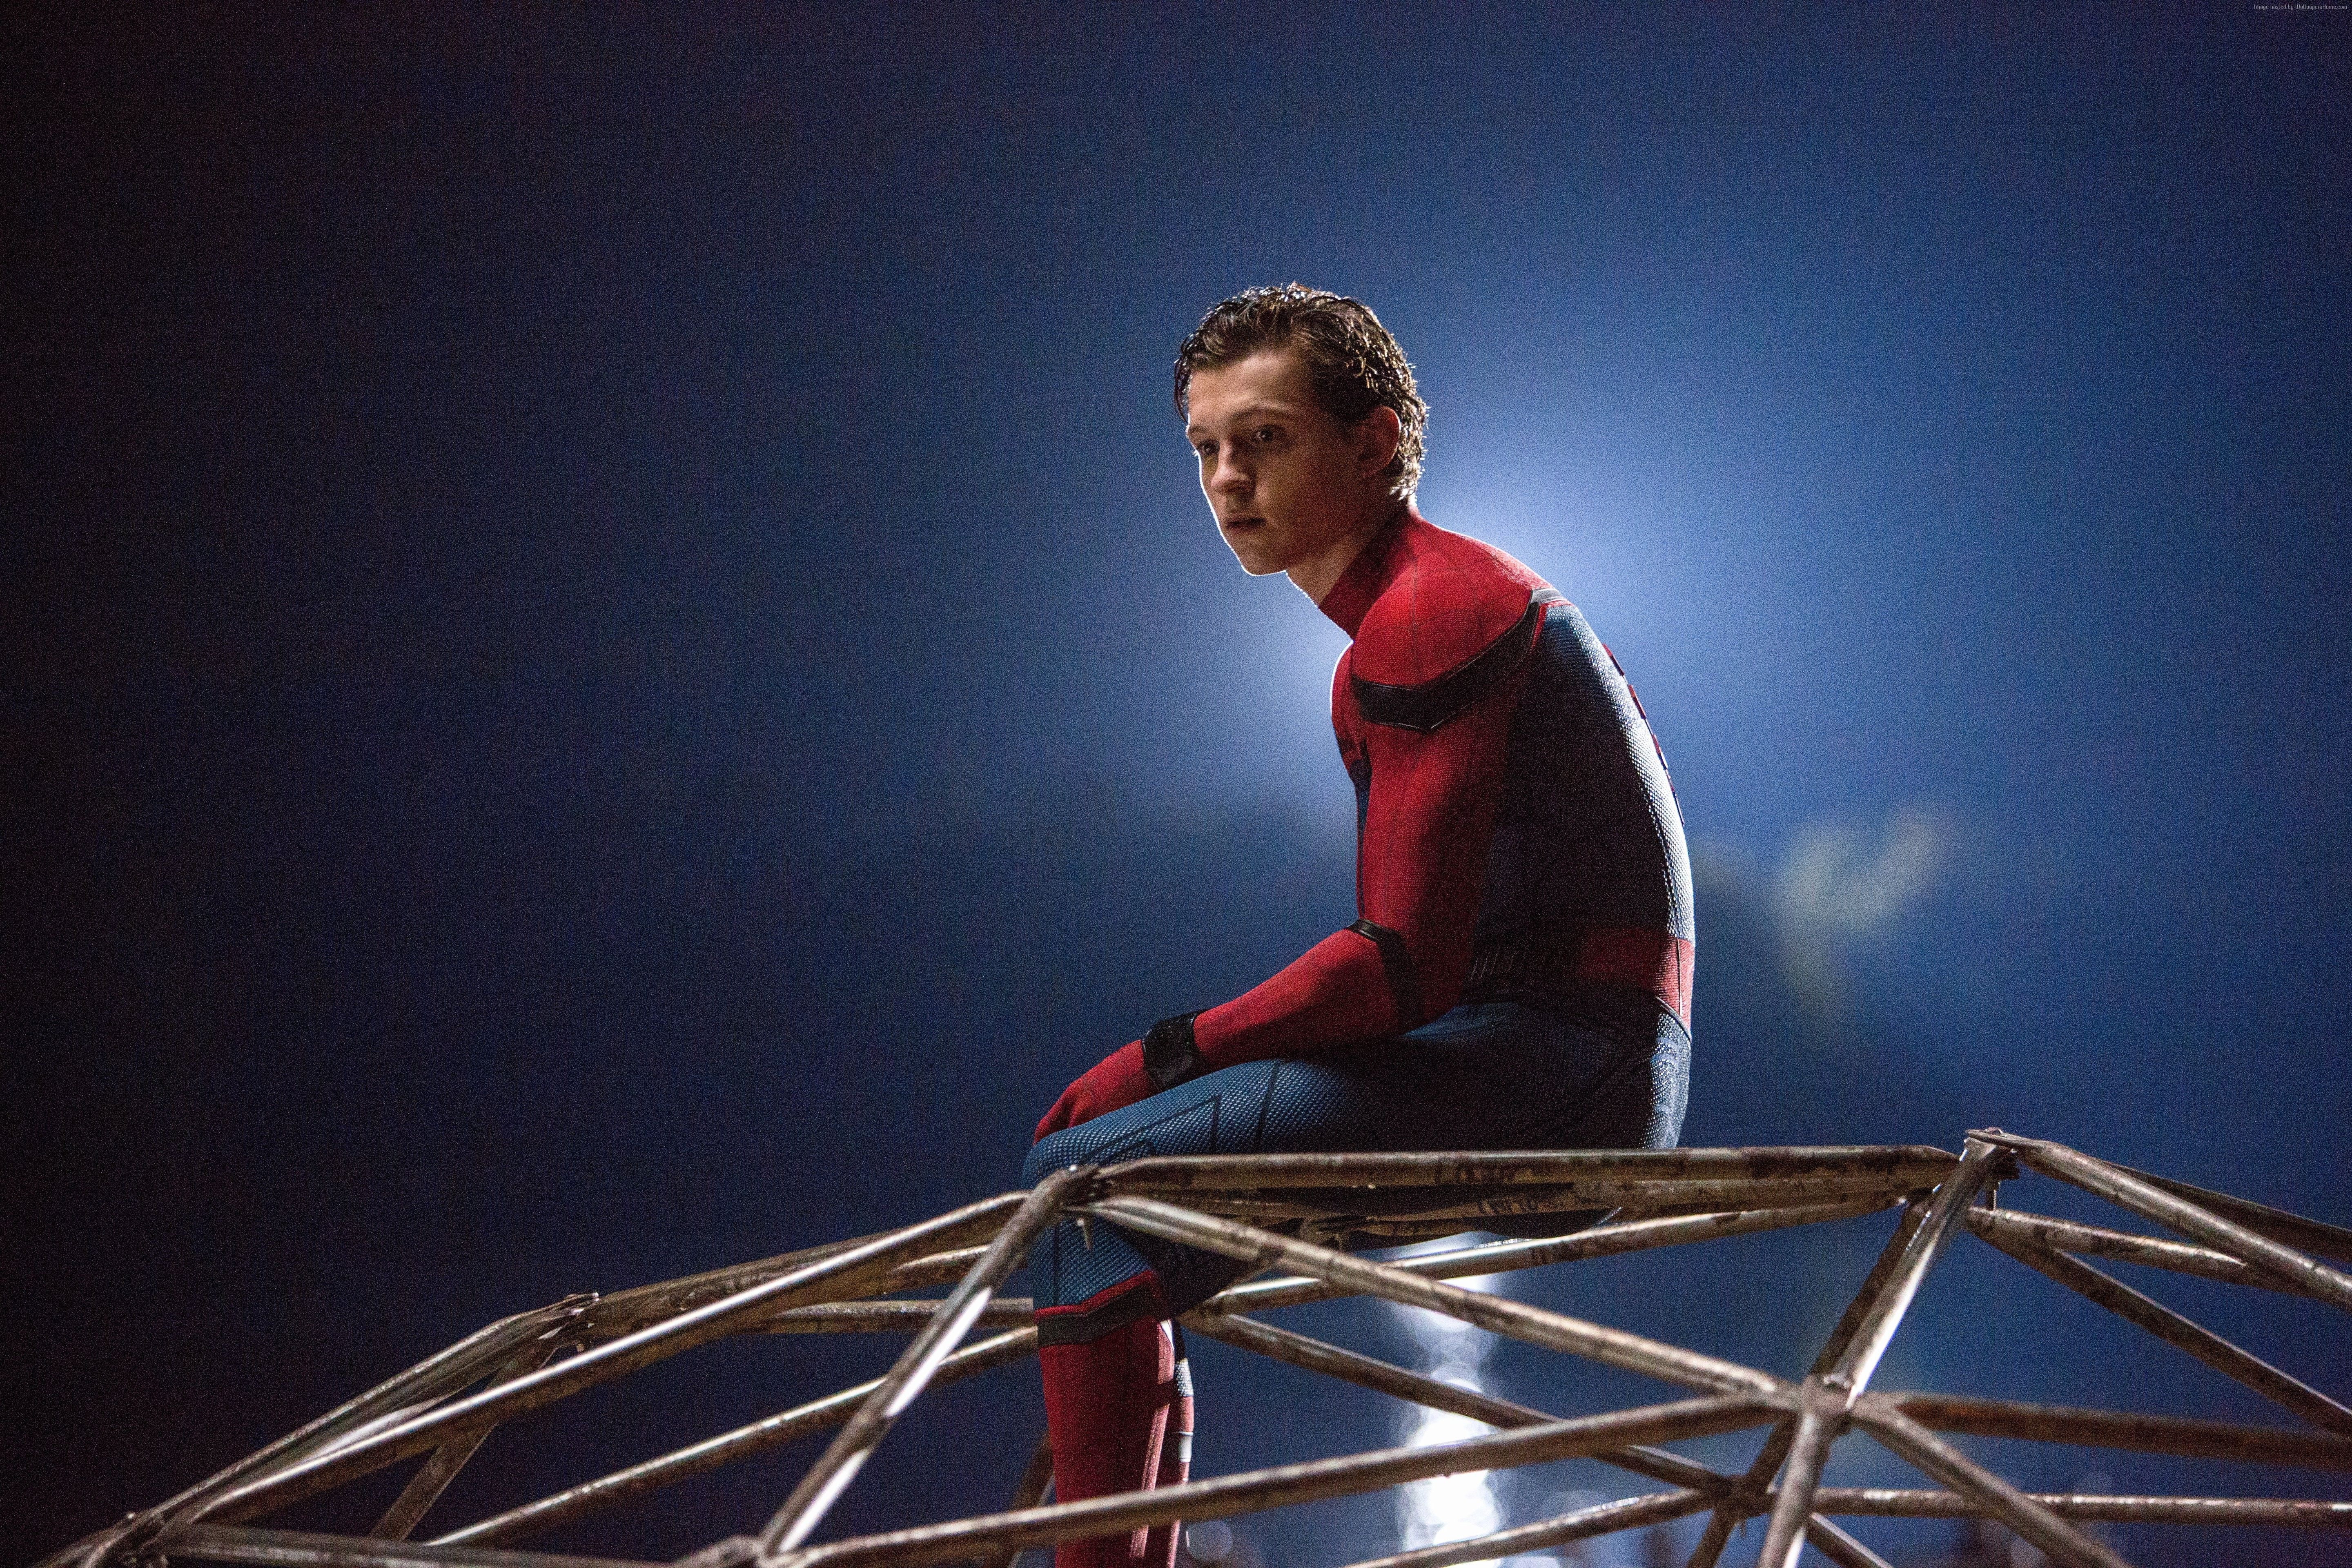 Tom Holland as Spider-Man in Spider-Man: Homecoming. He's sitting on a metal structure, wearing his Spider-Man suit, with a blue background. - Marvel, Tom Holland